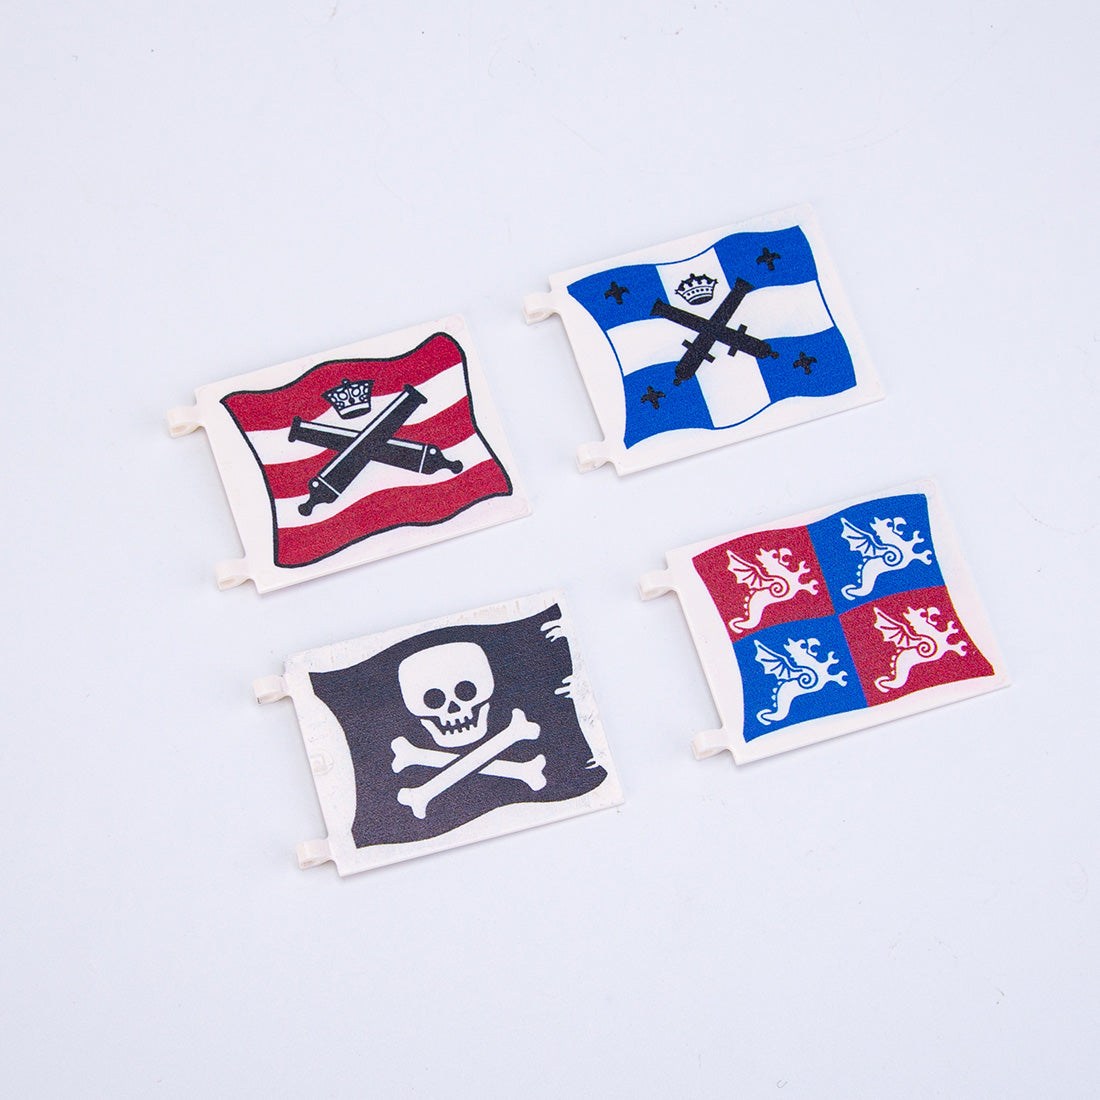 Square 6x4 Double-sided Flags Building Blocks Part